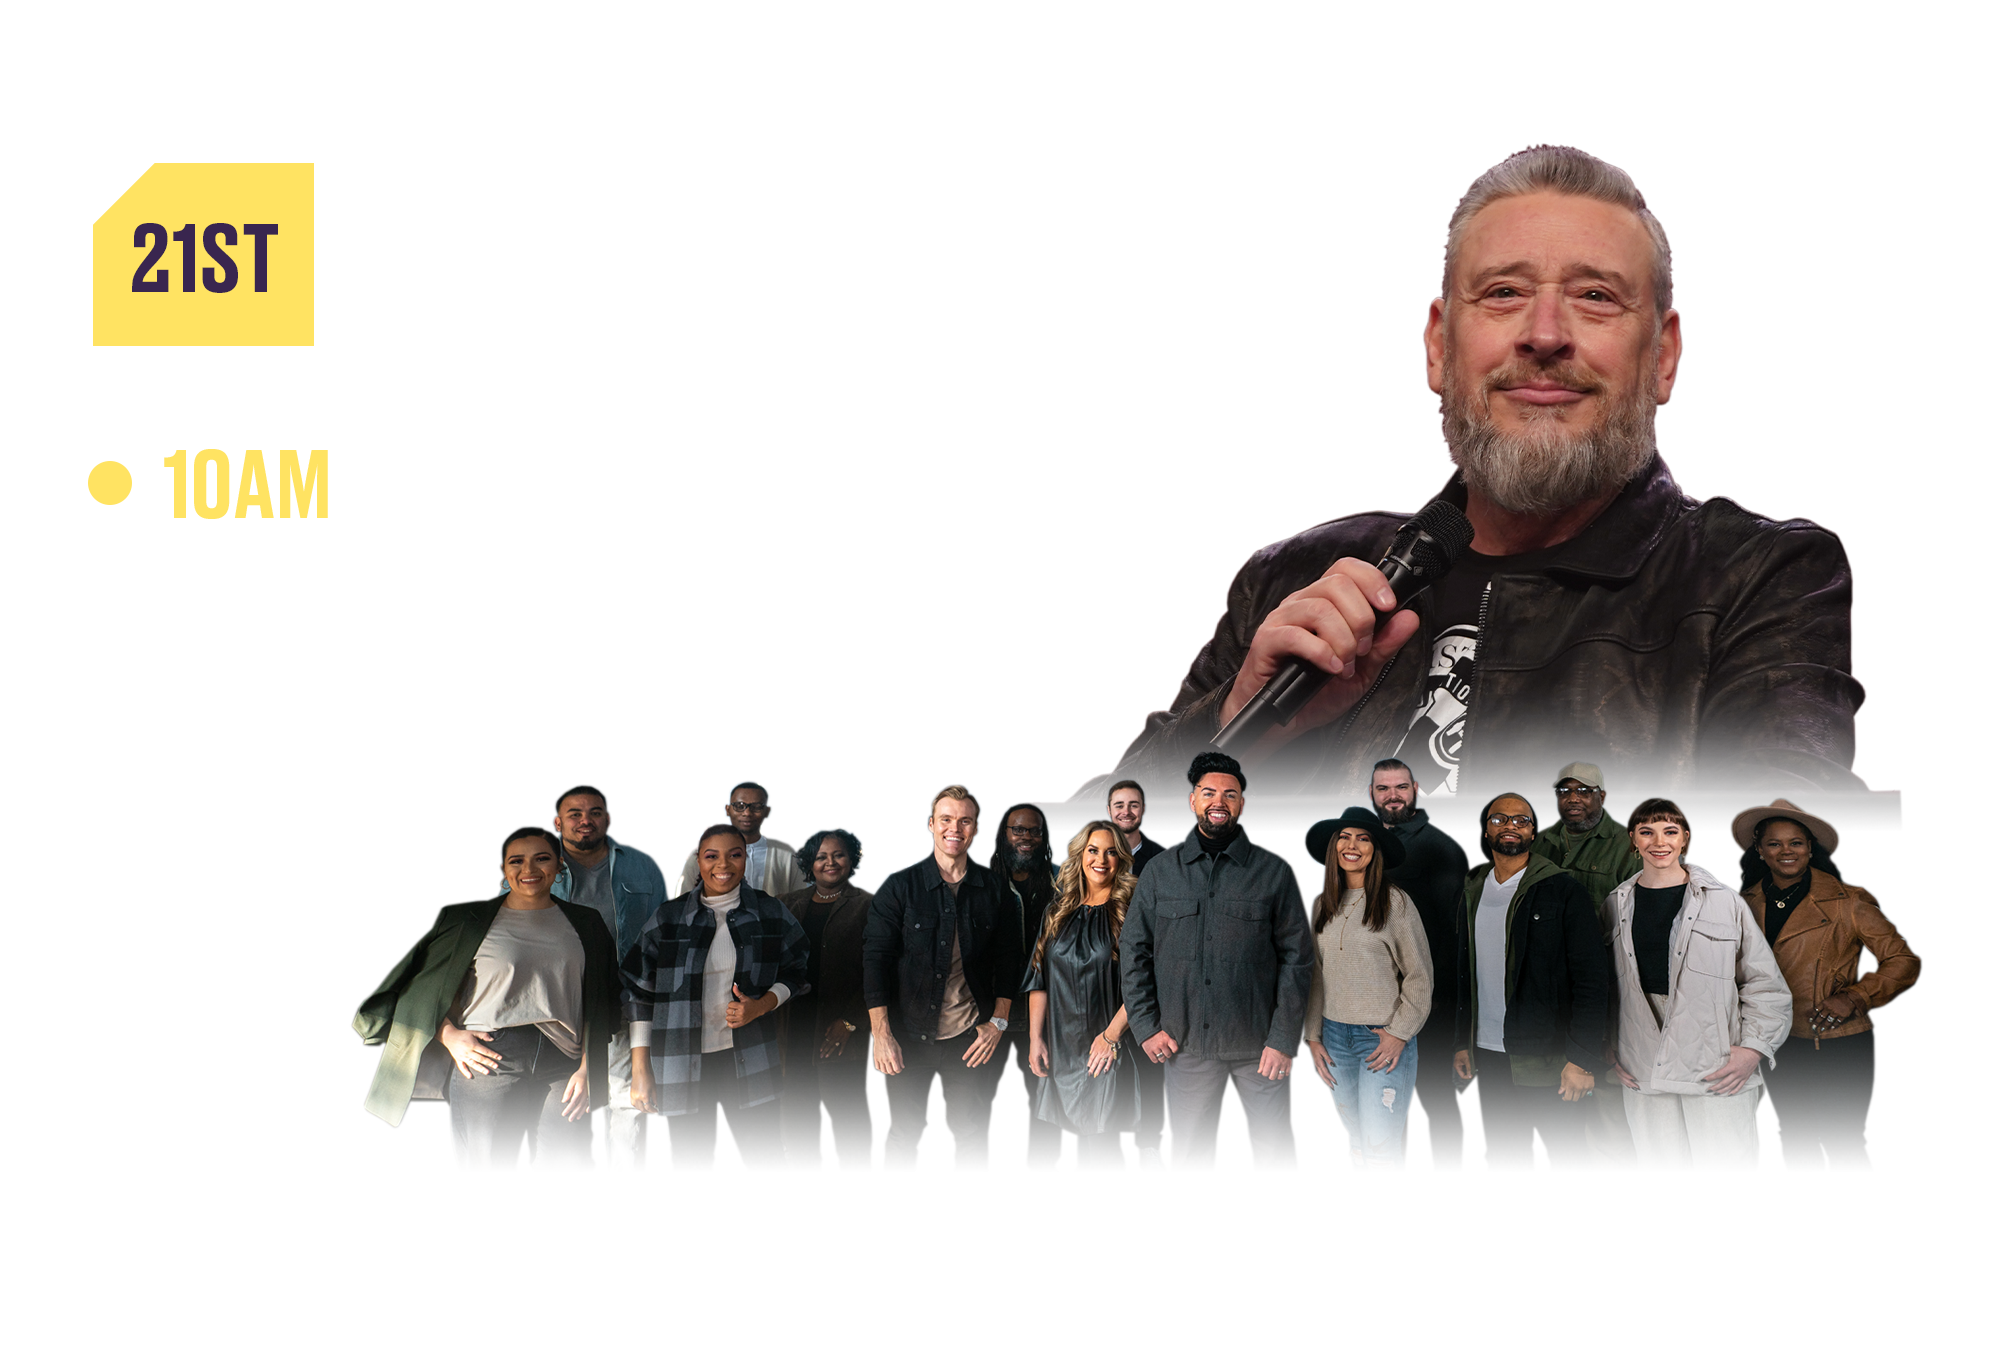 21st Sunday Morning 7PM With Dr. Rod Parsley Harvest Music Live